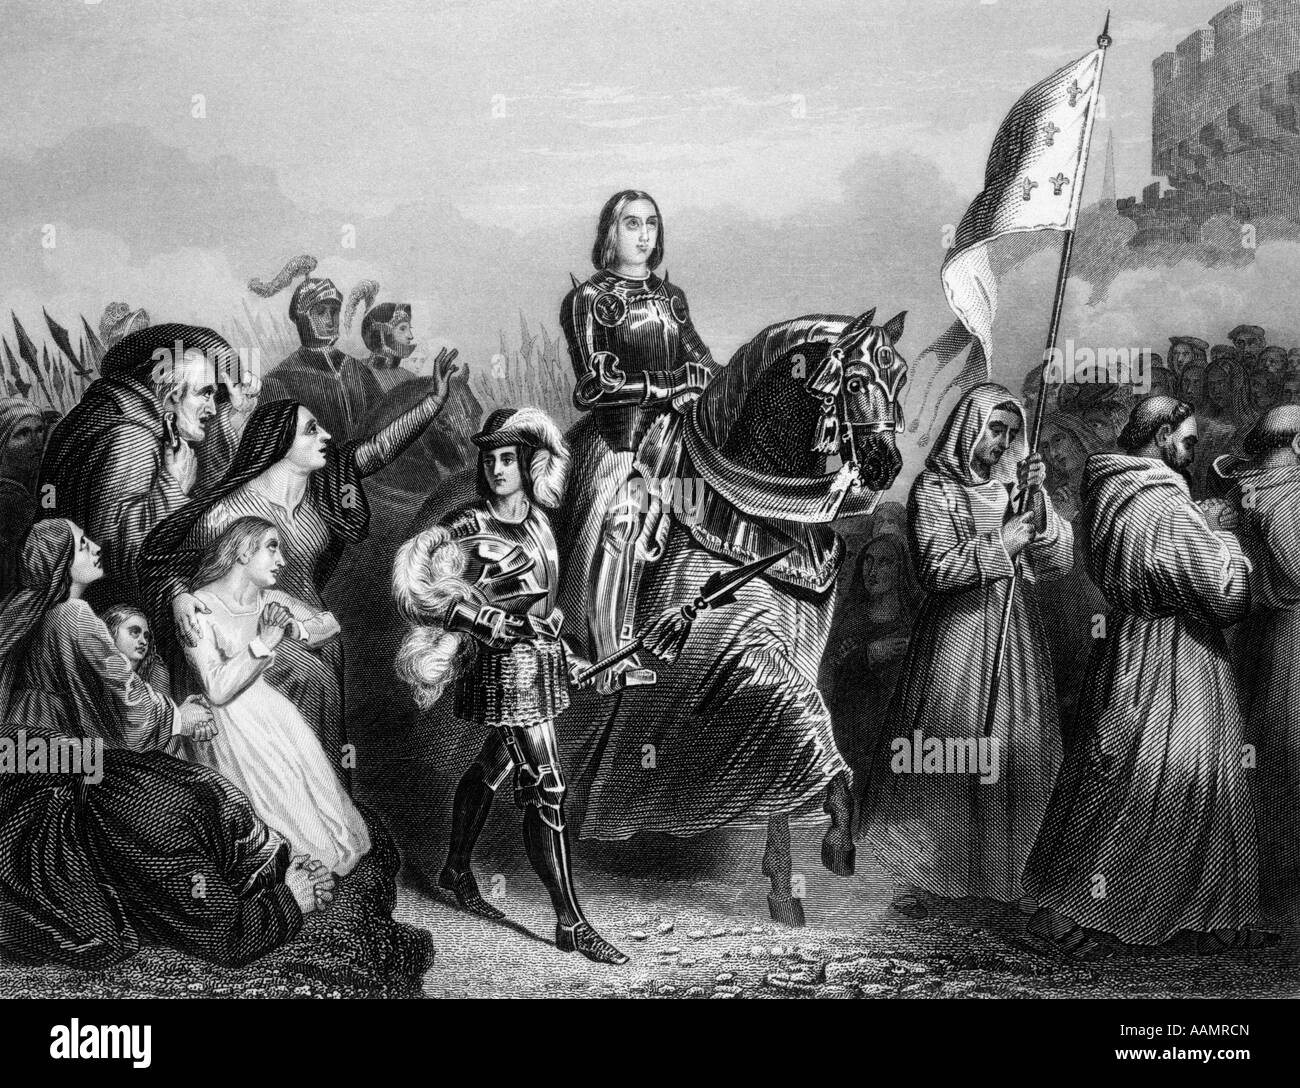 ENTRY OF JOAN OF ARC INTO ORLEANS 1429 FRENCH SAINT WOMAN MILITARY LEADER HEROINE CATHOLIC MAID OF ORLEANS JEANNE D'ARC Stock Photo